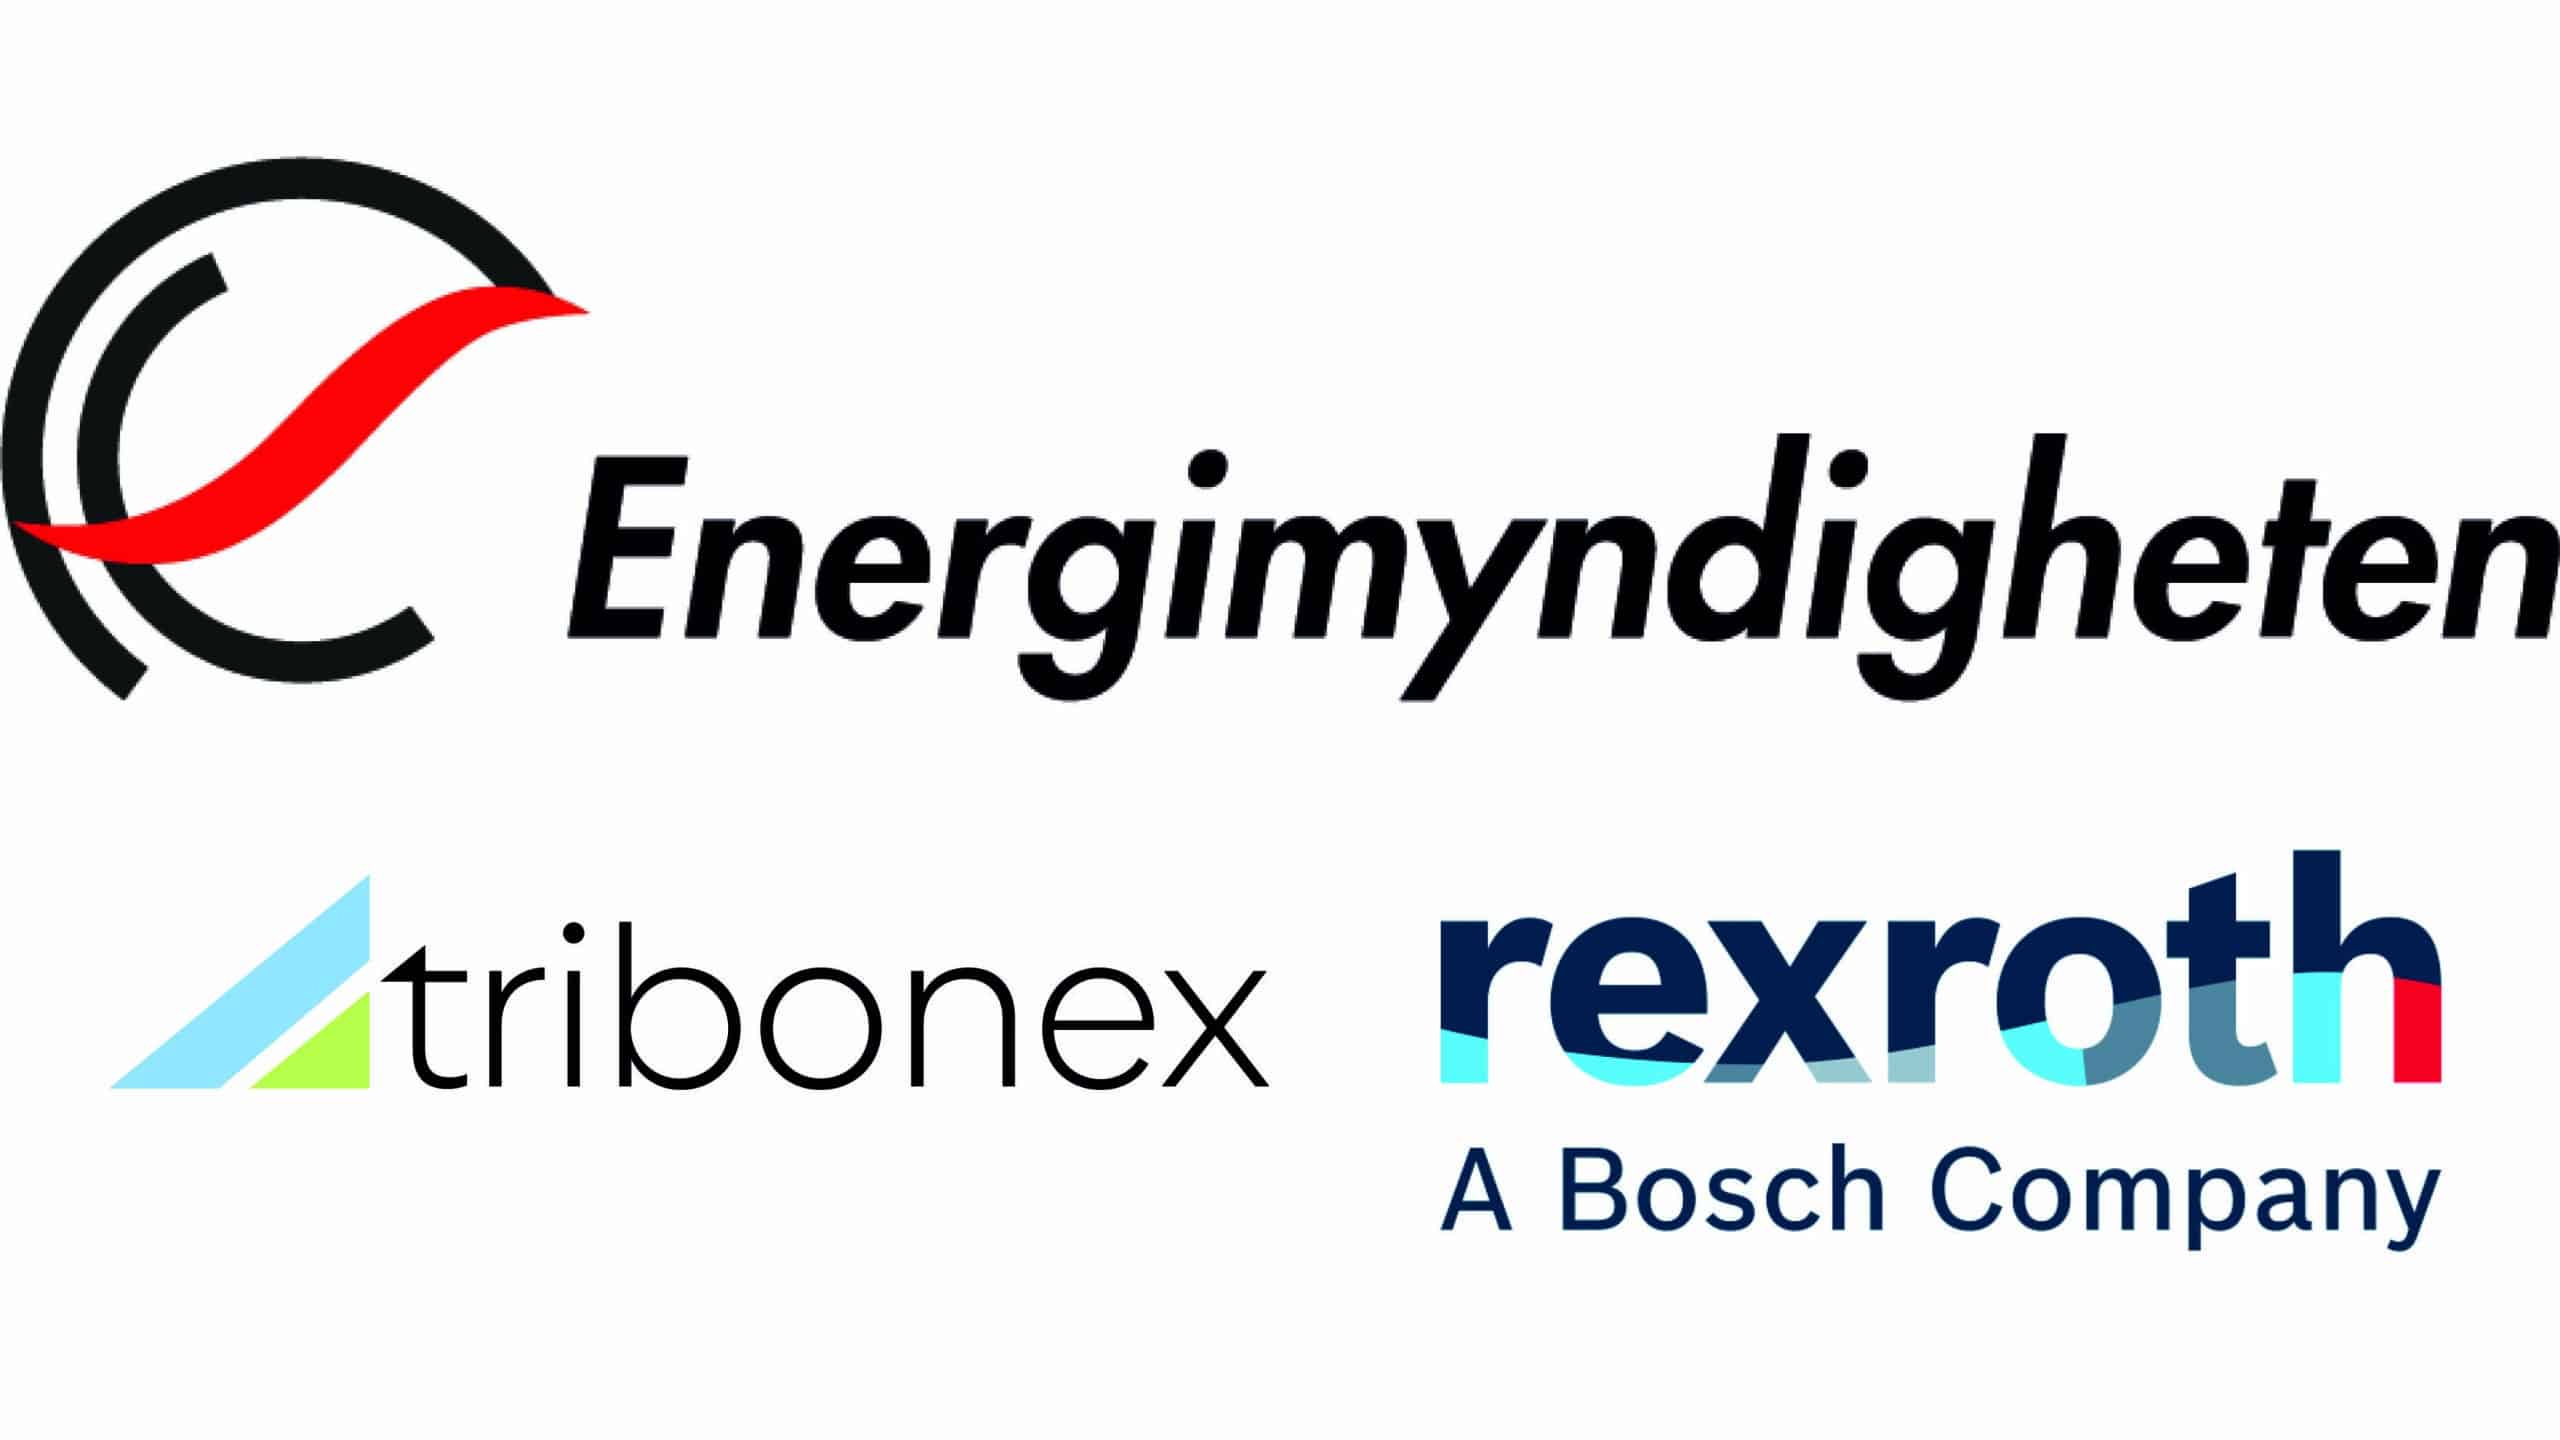 Swedish Energy Agency grant program together with Bosch Rexroth